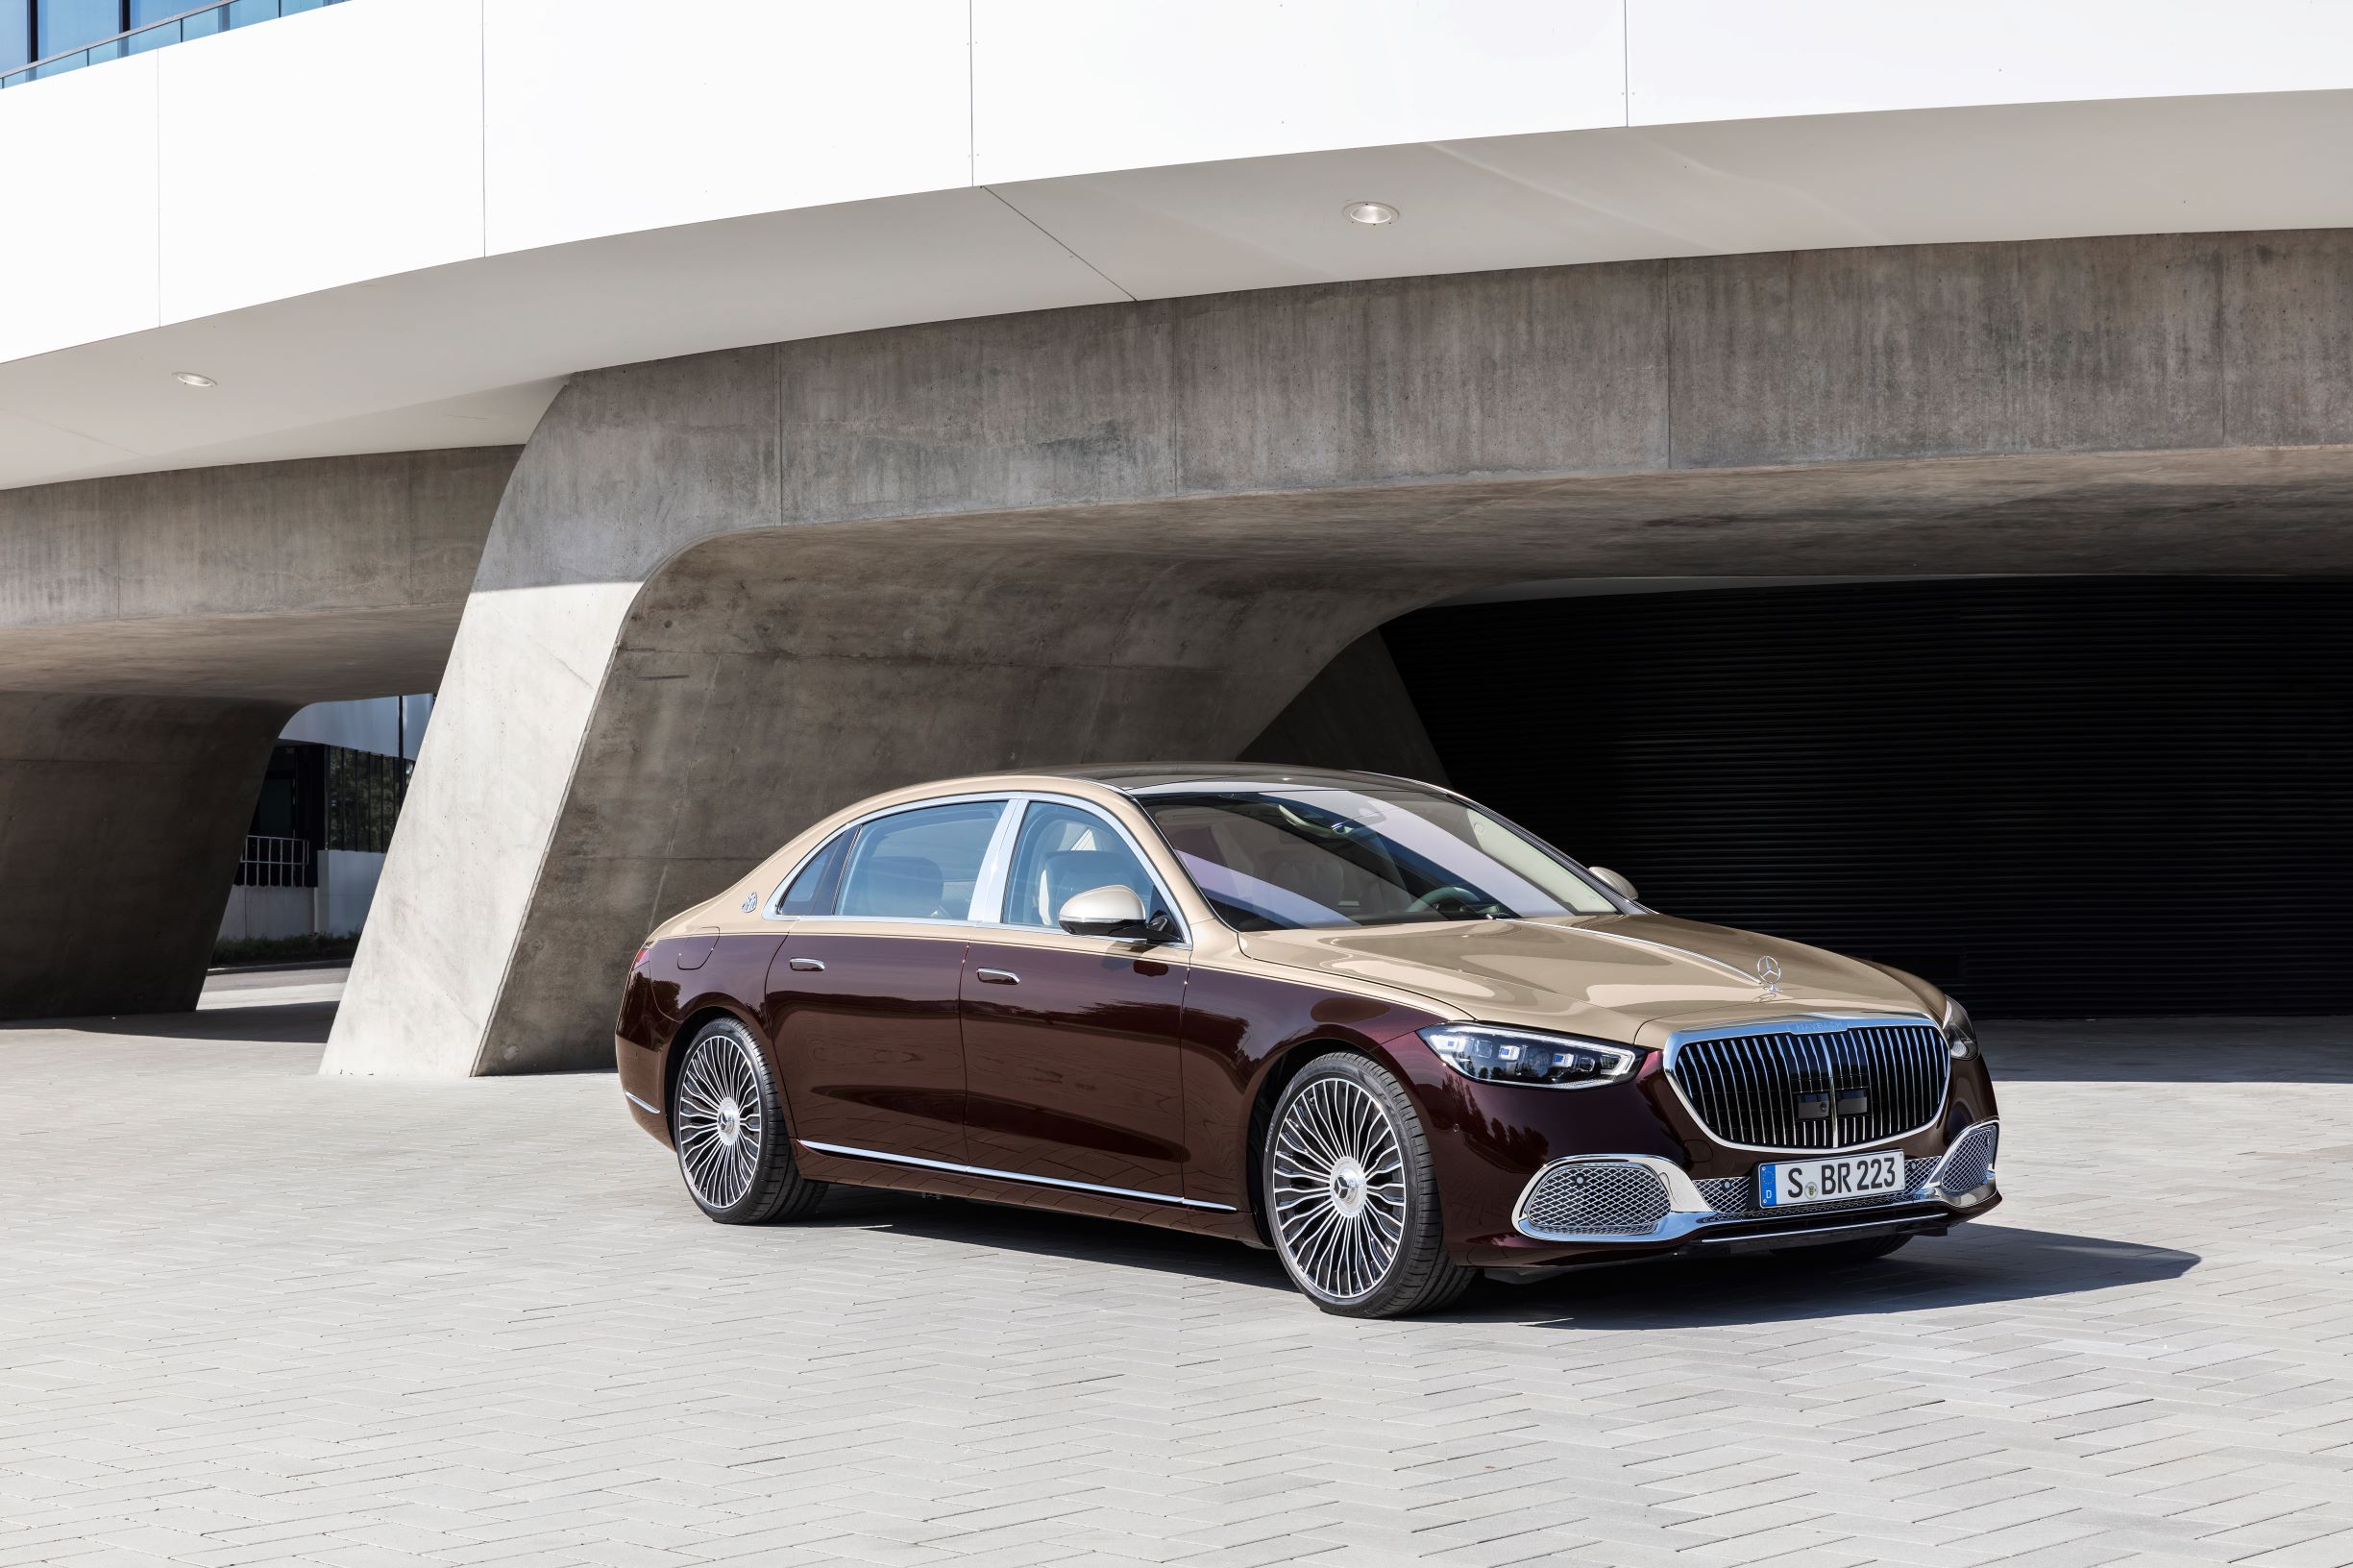 A gold-and-maroon 2021 Mercedes-Maybach S-Class